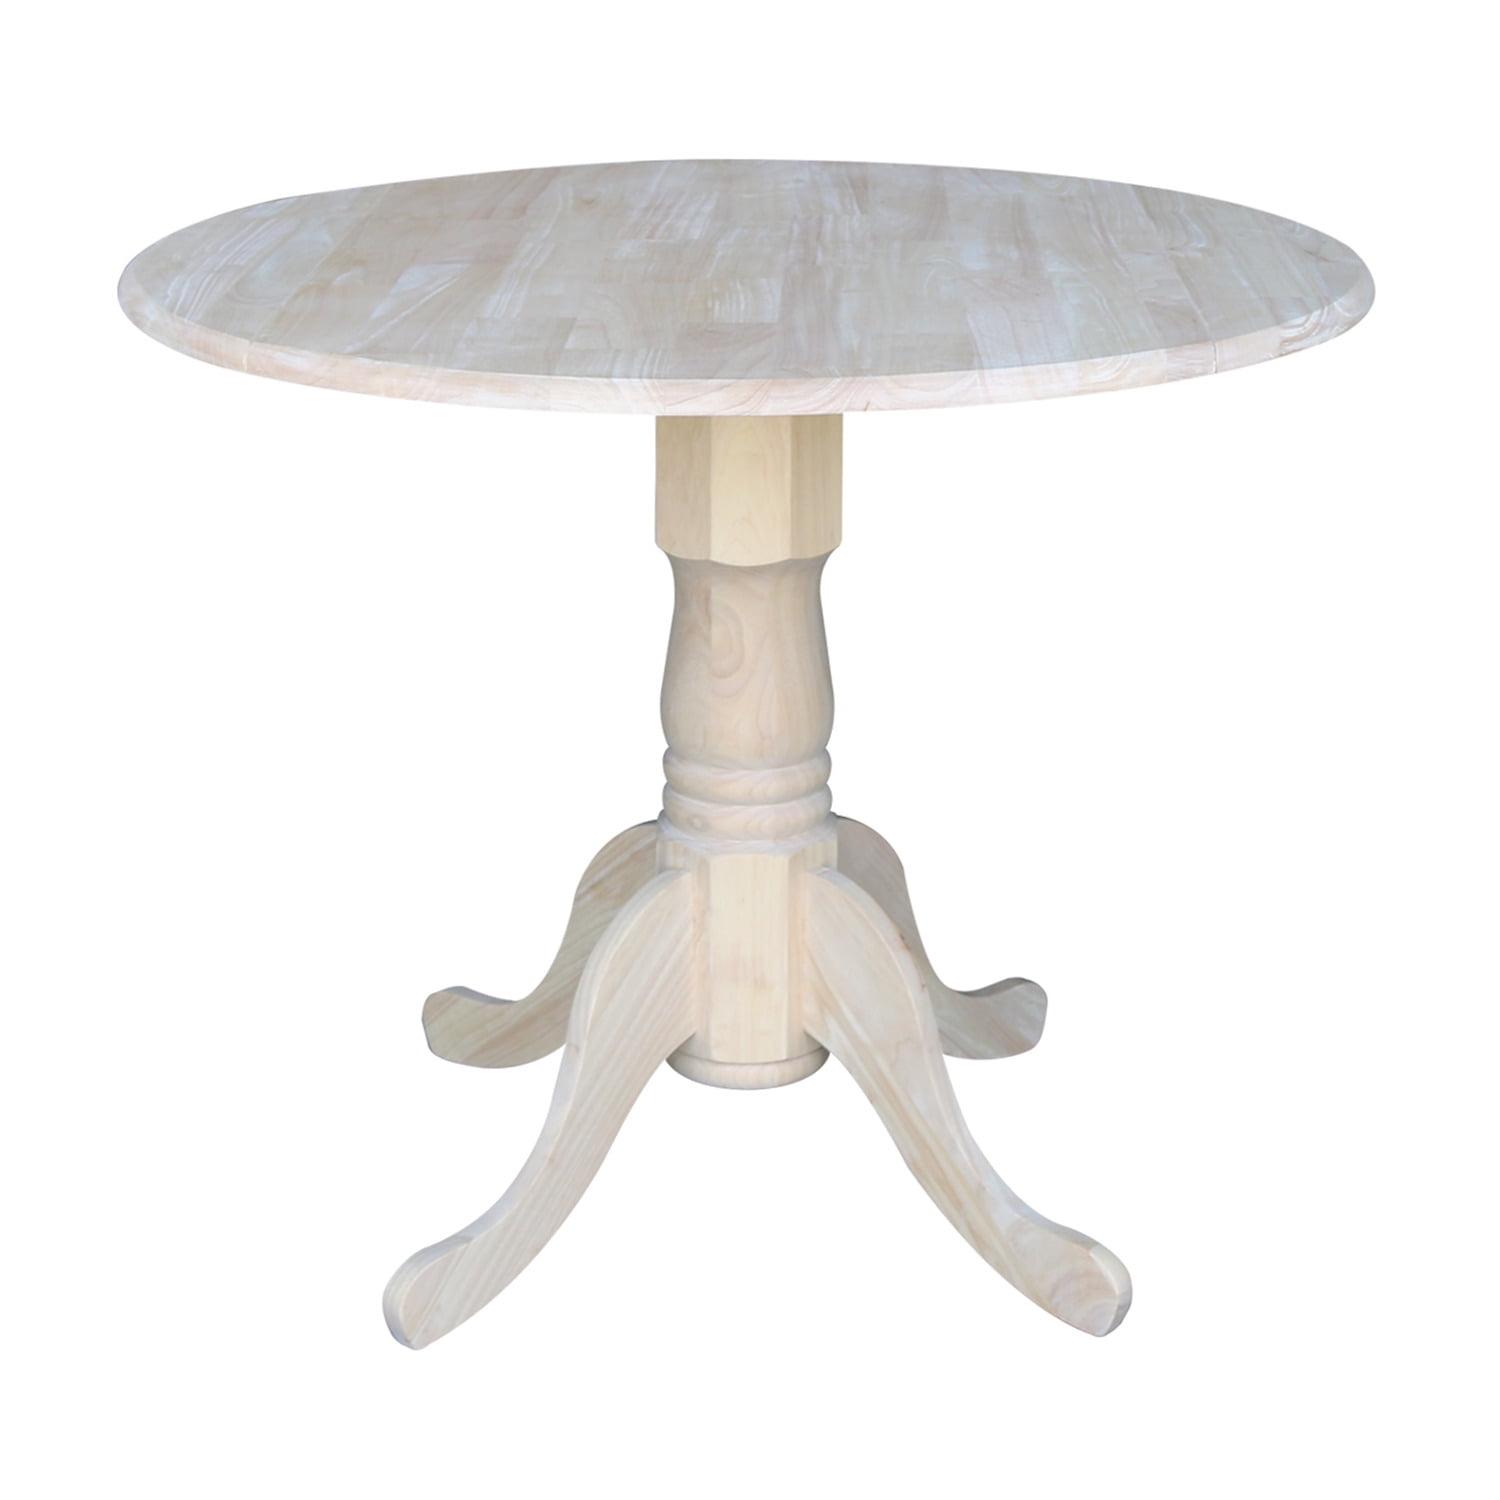 Elegant French Country 36" Round Extendable Wood Dining Table